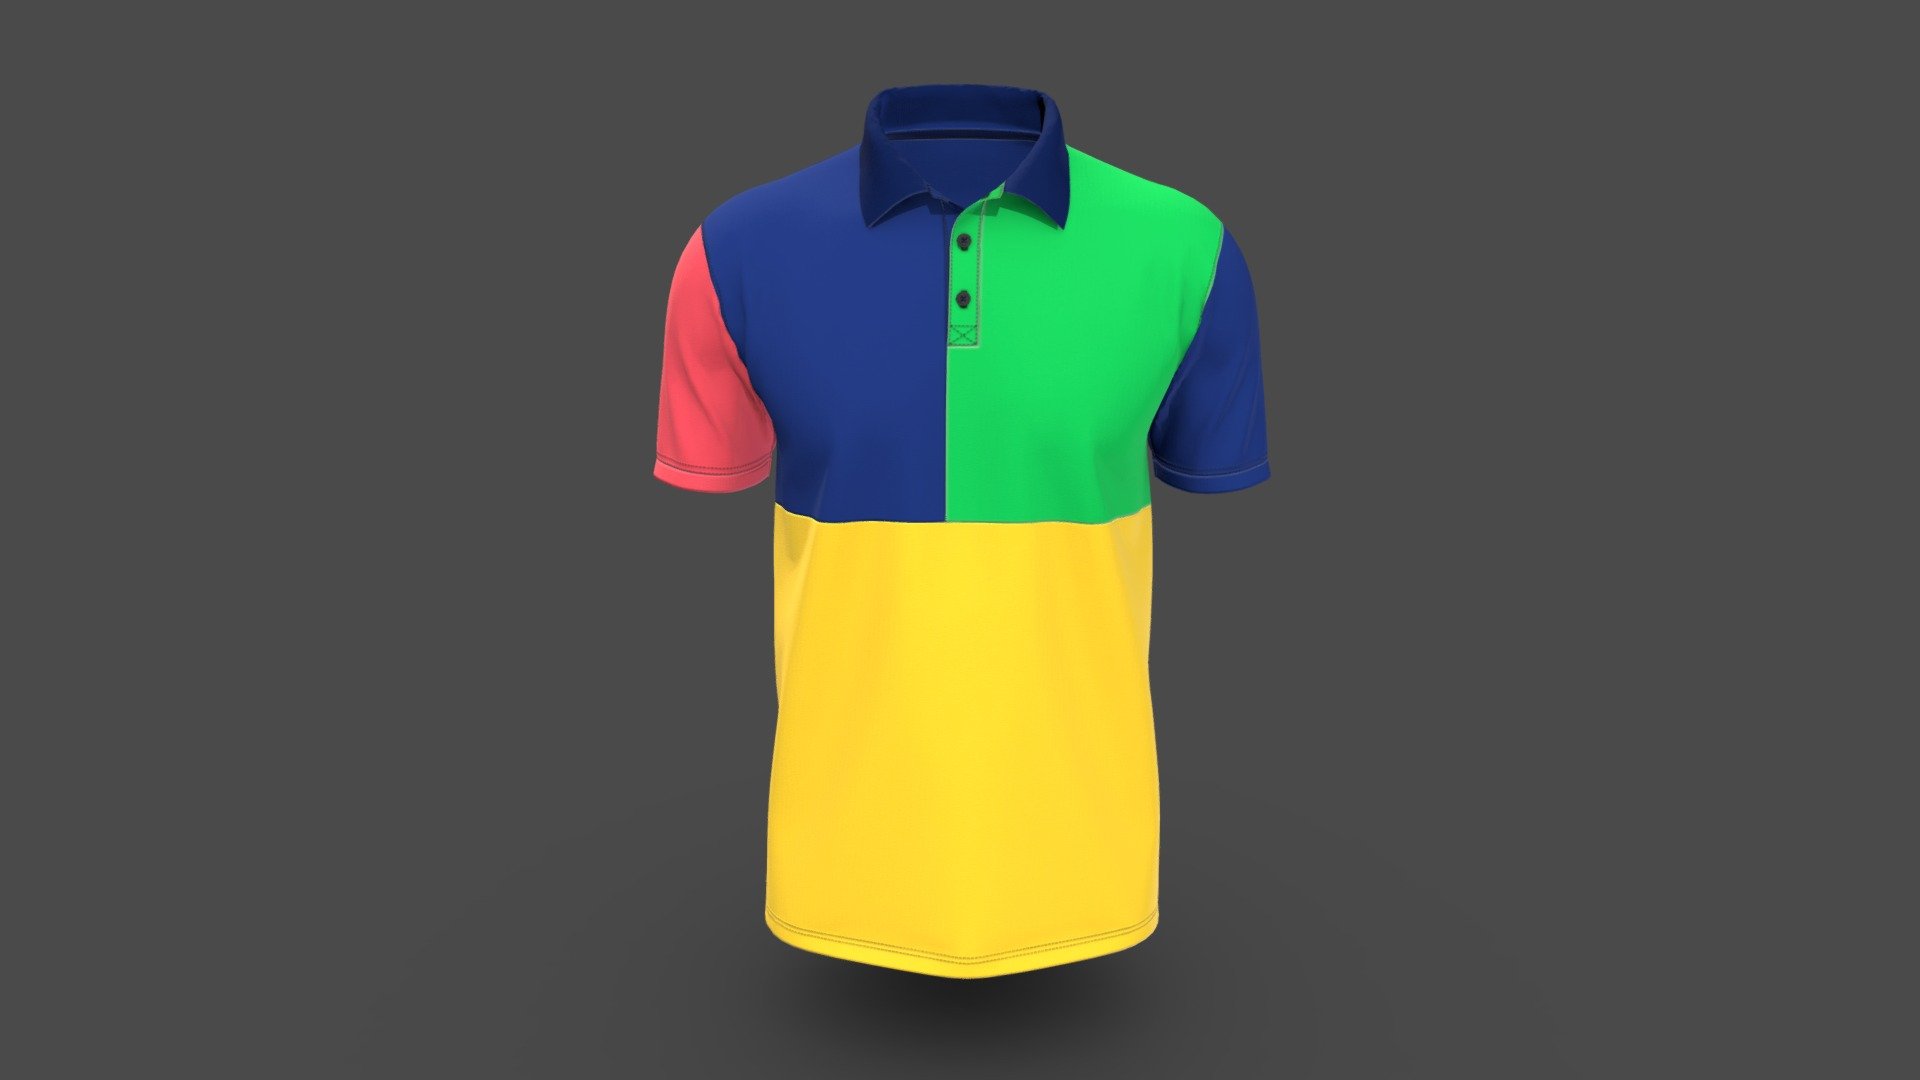 Men Color Block Polo Shirt
Version V1.0

Realistic high detailed Mens Poloshirt with high resolution textures. Model created by our unique processing &amp; Optimized for Web and AR / VR. 

Features

Optimized &amp; NON-Optimized obj model with 4K texture included




Optimized for AR/VR/MR

4K &amp; 2K fabric texture and details

Optimized model is 1.75MB

NON-Optimized model is 12.8MB

Knit fabric texture and print details included

GLB file in 2k texture size is 3.29MB

GLB file in 4k texture size is 15.4MB  (Game &amp; Animation Ready)

Suitable for web application configurator development.

Fully unwrap UV

The model has 1 material

Includes high detailed normal map

Unit measurment was inch

Triangular Mesh with 9.9k Vertices

Texture map: Base color, OcclusionRoughnessMetallic(ORM), Normal

Tpose  available on request

For more details or custom order send email: hello@binarycloth.com


Website:binarycloth.com - Men Color Block Polo Shirt - Buy Royalty Free 3D model by BINARYCLOTH (@binaryclothofficial) 3d model